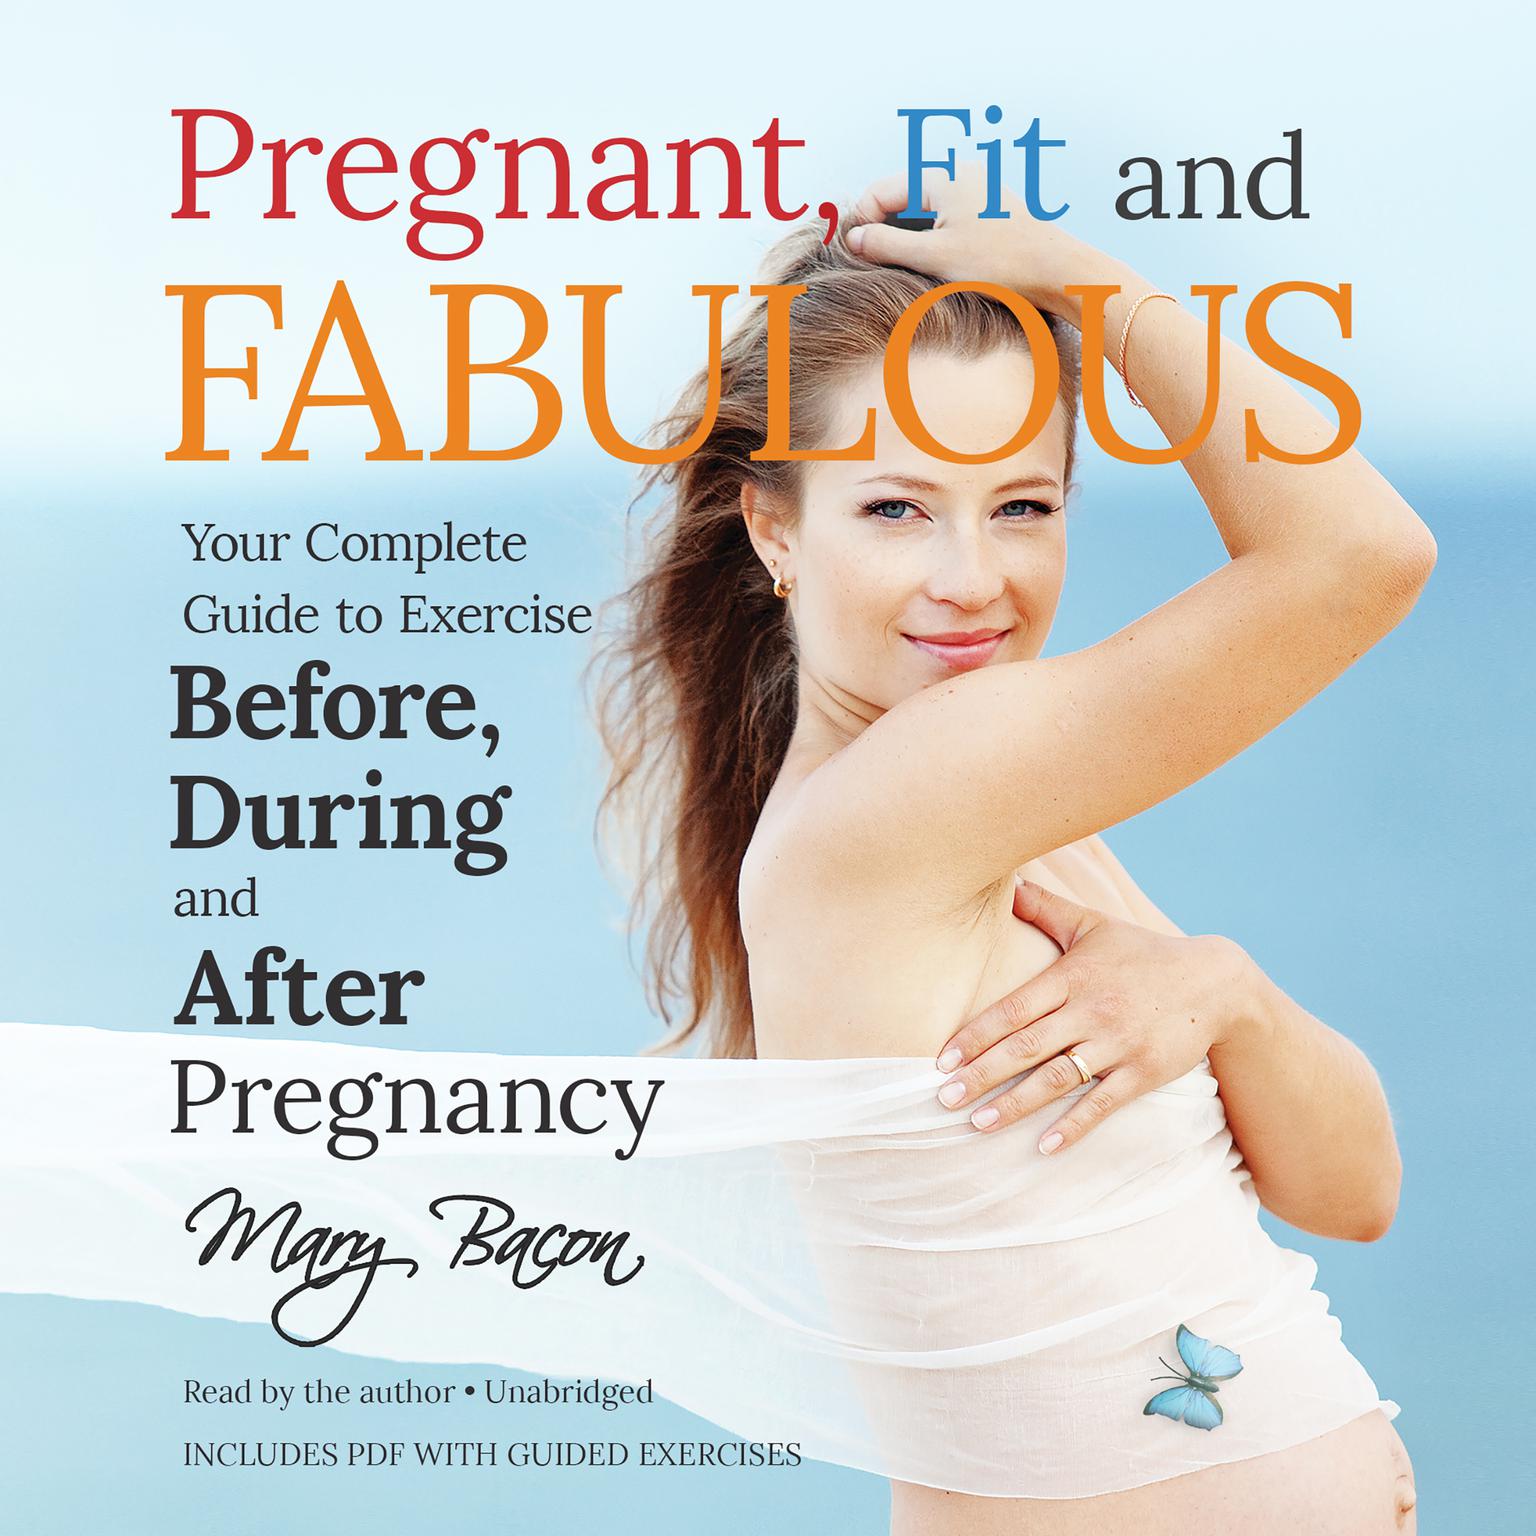 Pregnant, Fit, and Fabulous: Your Complete Guide to Exercise before, during, and after Pregnancy Audiobook, by Mary Bacon